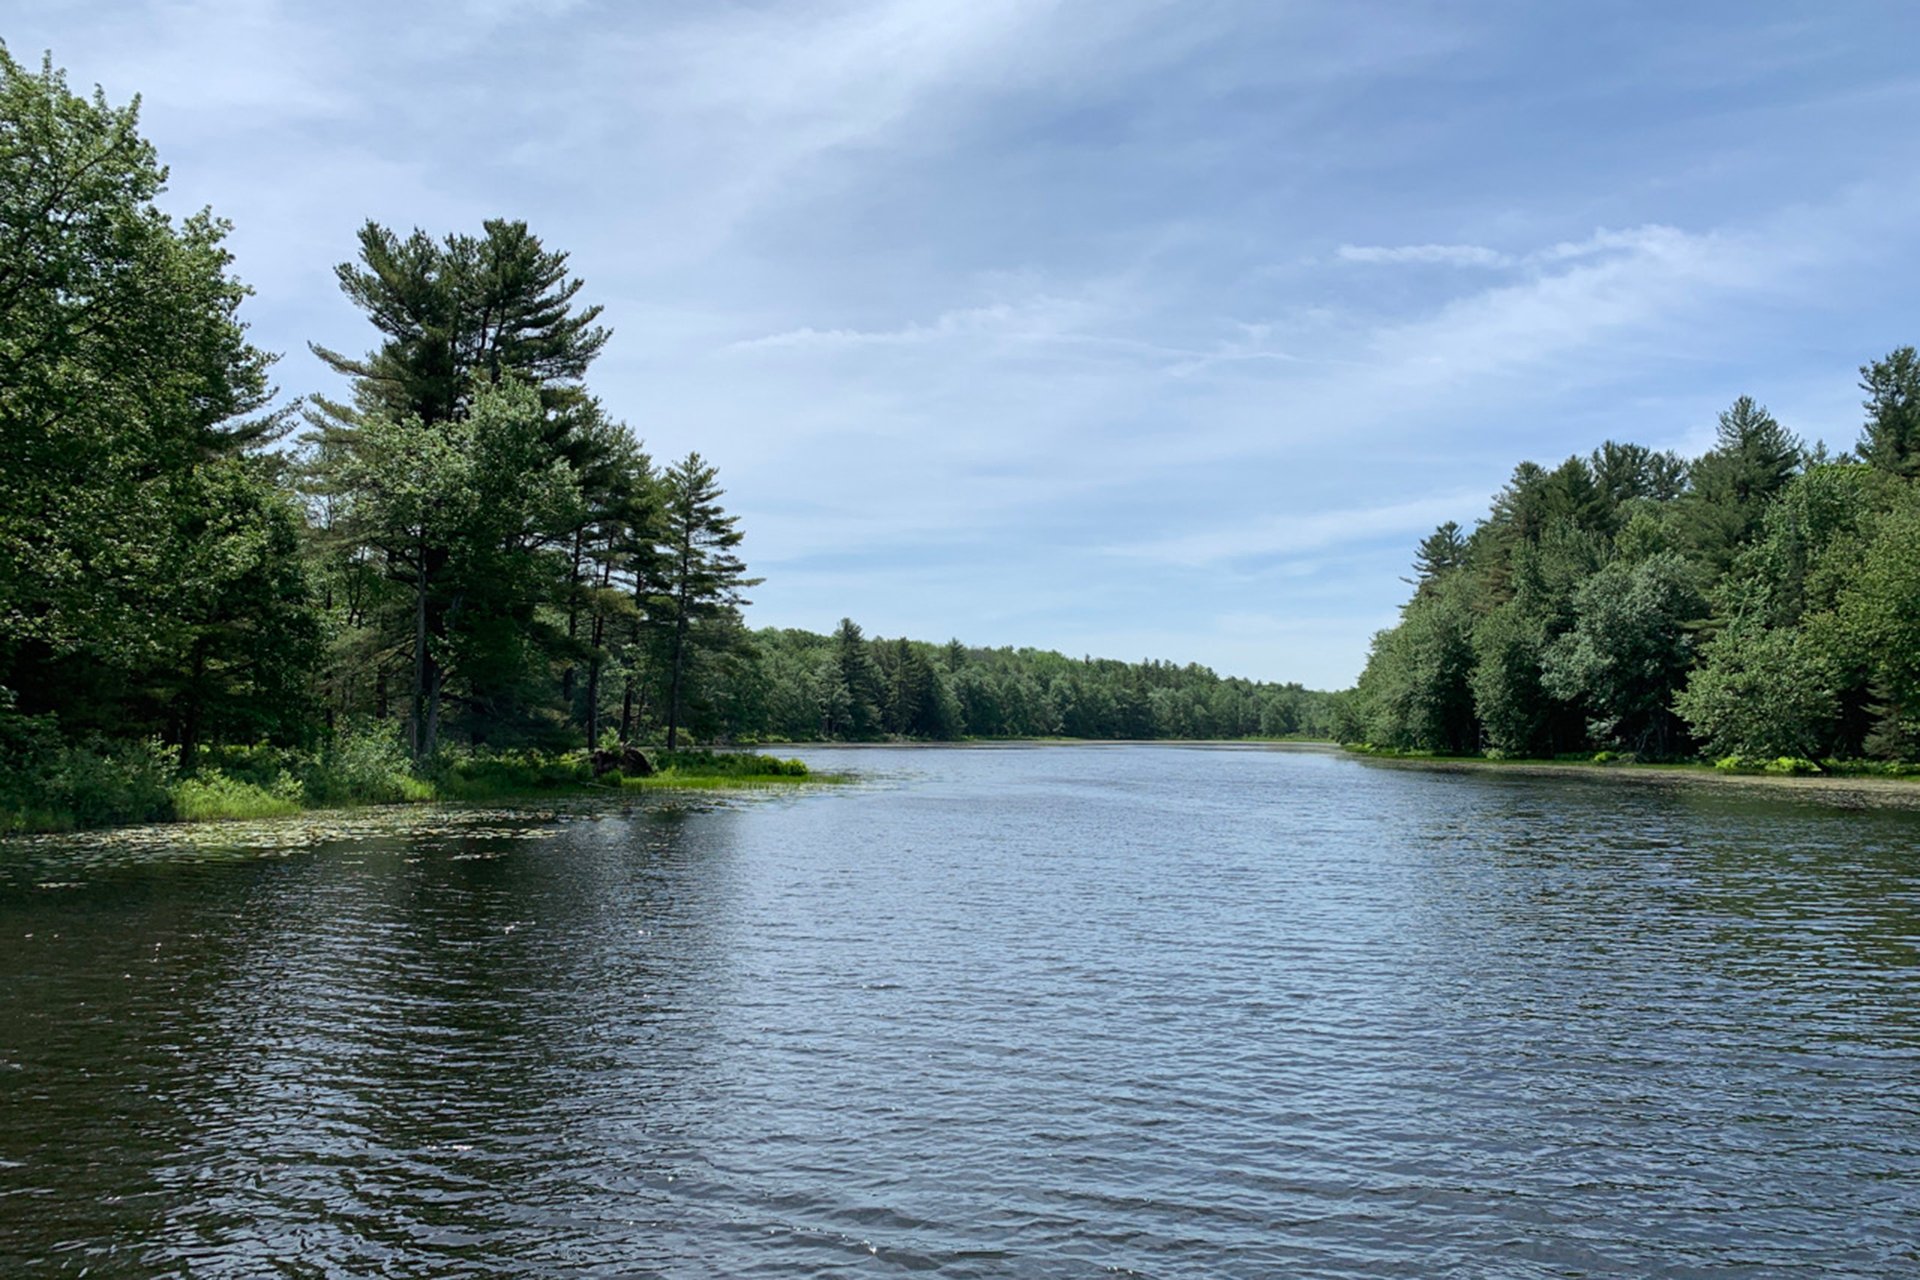 Gaston Pond surrounded by lush green trees on its shores